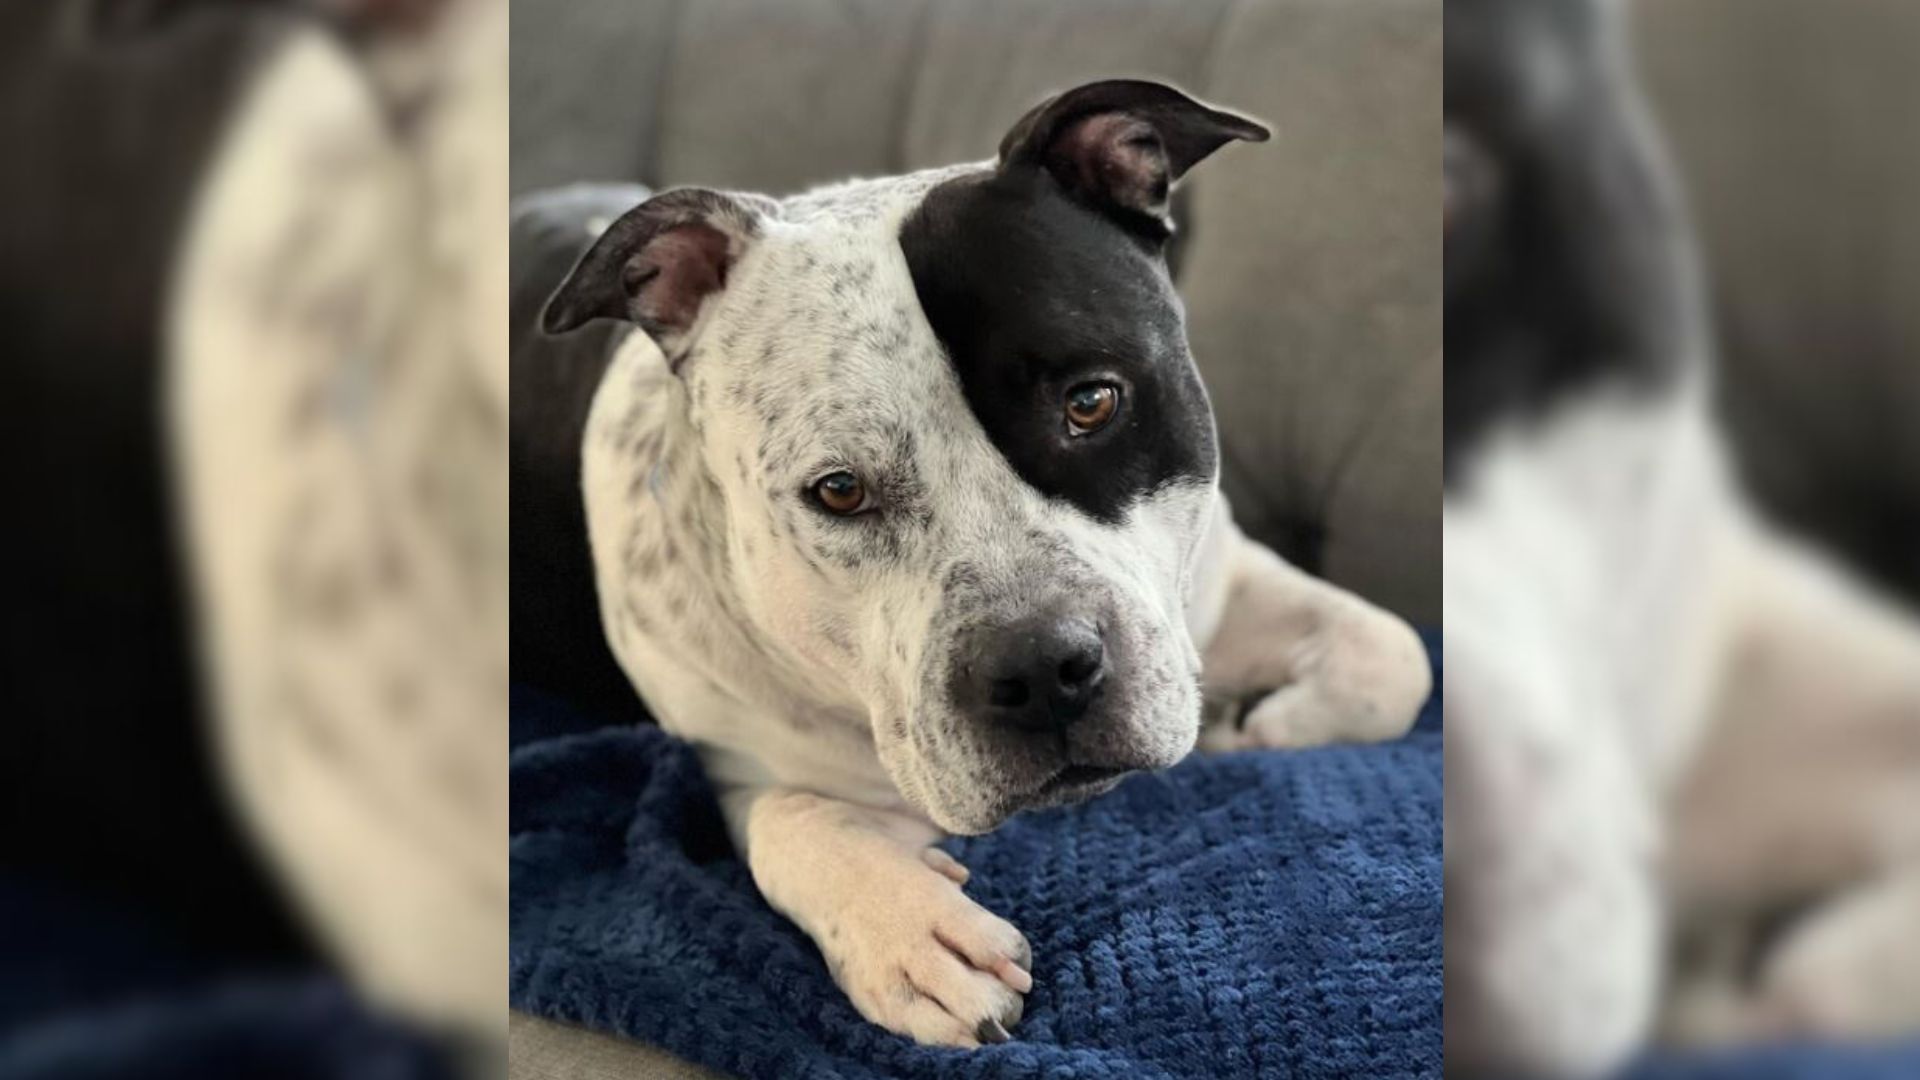 Overlooked Shelter Dog Saved From Being Euthanized Is So Happy To Finally Have A Family